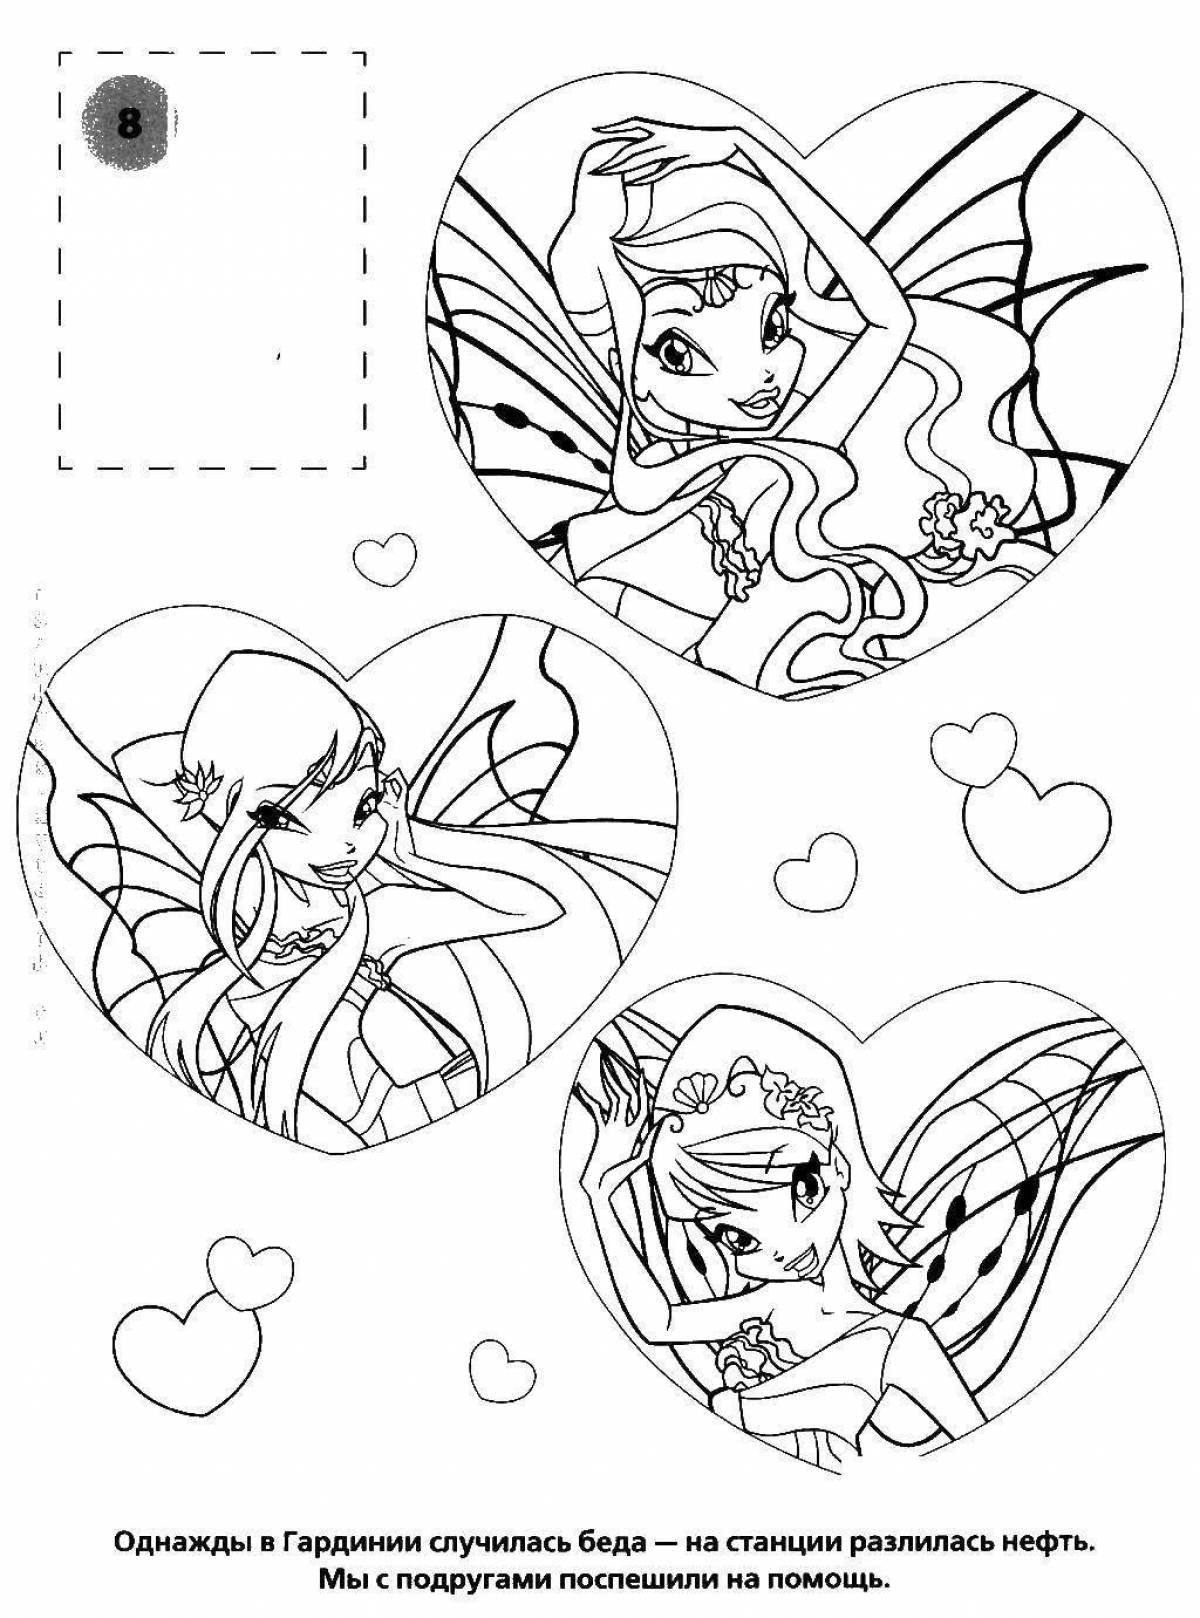 Inspiring comic book coloring pages for girls